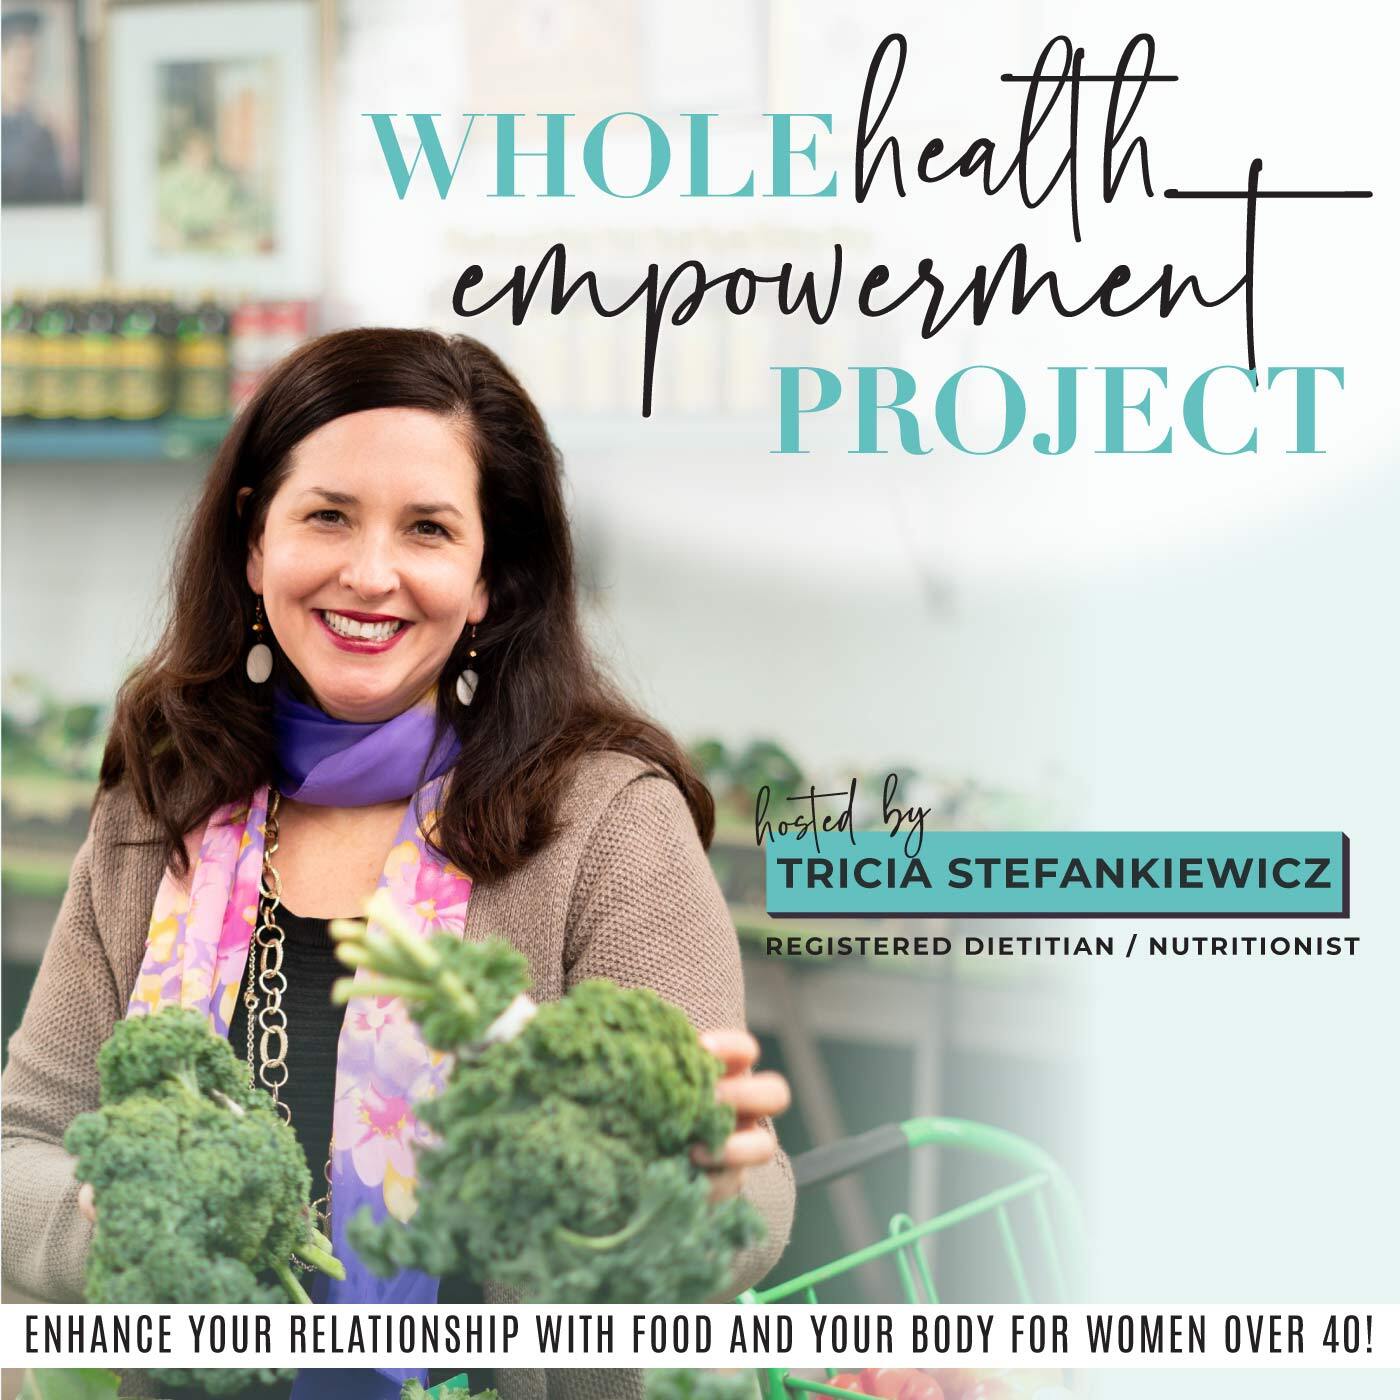 Whole Health Empowerment Project-weight loss after 40, intuitive eating, food freedom, body neutrality, midlife, growth mindset, mindset motivation, for health tips, health empowerment